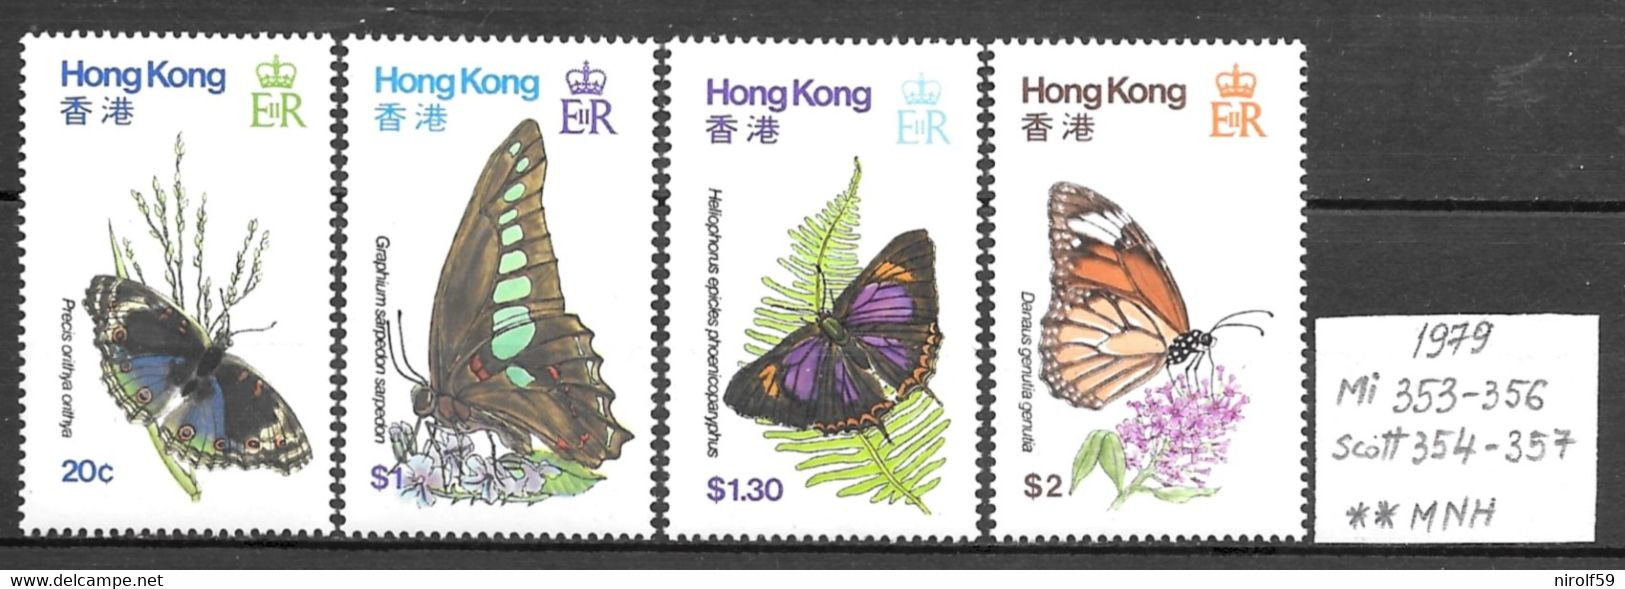 Hong Kong 1979 - Michel 353-356,Scott 354-357,MNH(mint Never Hinged) - Unused Stamps